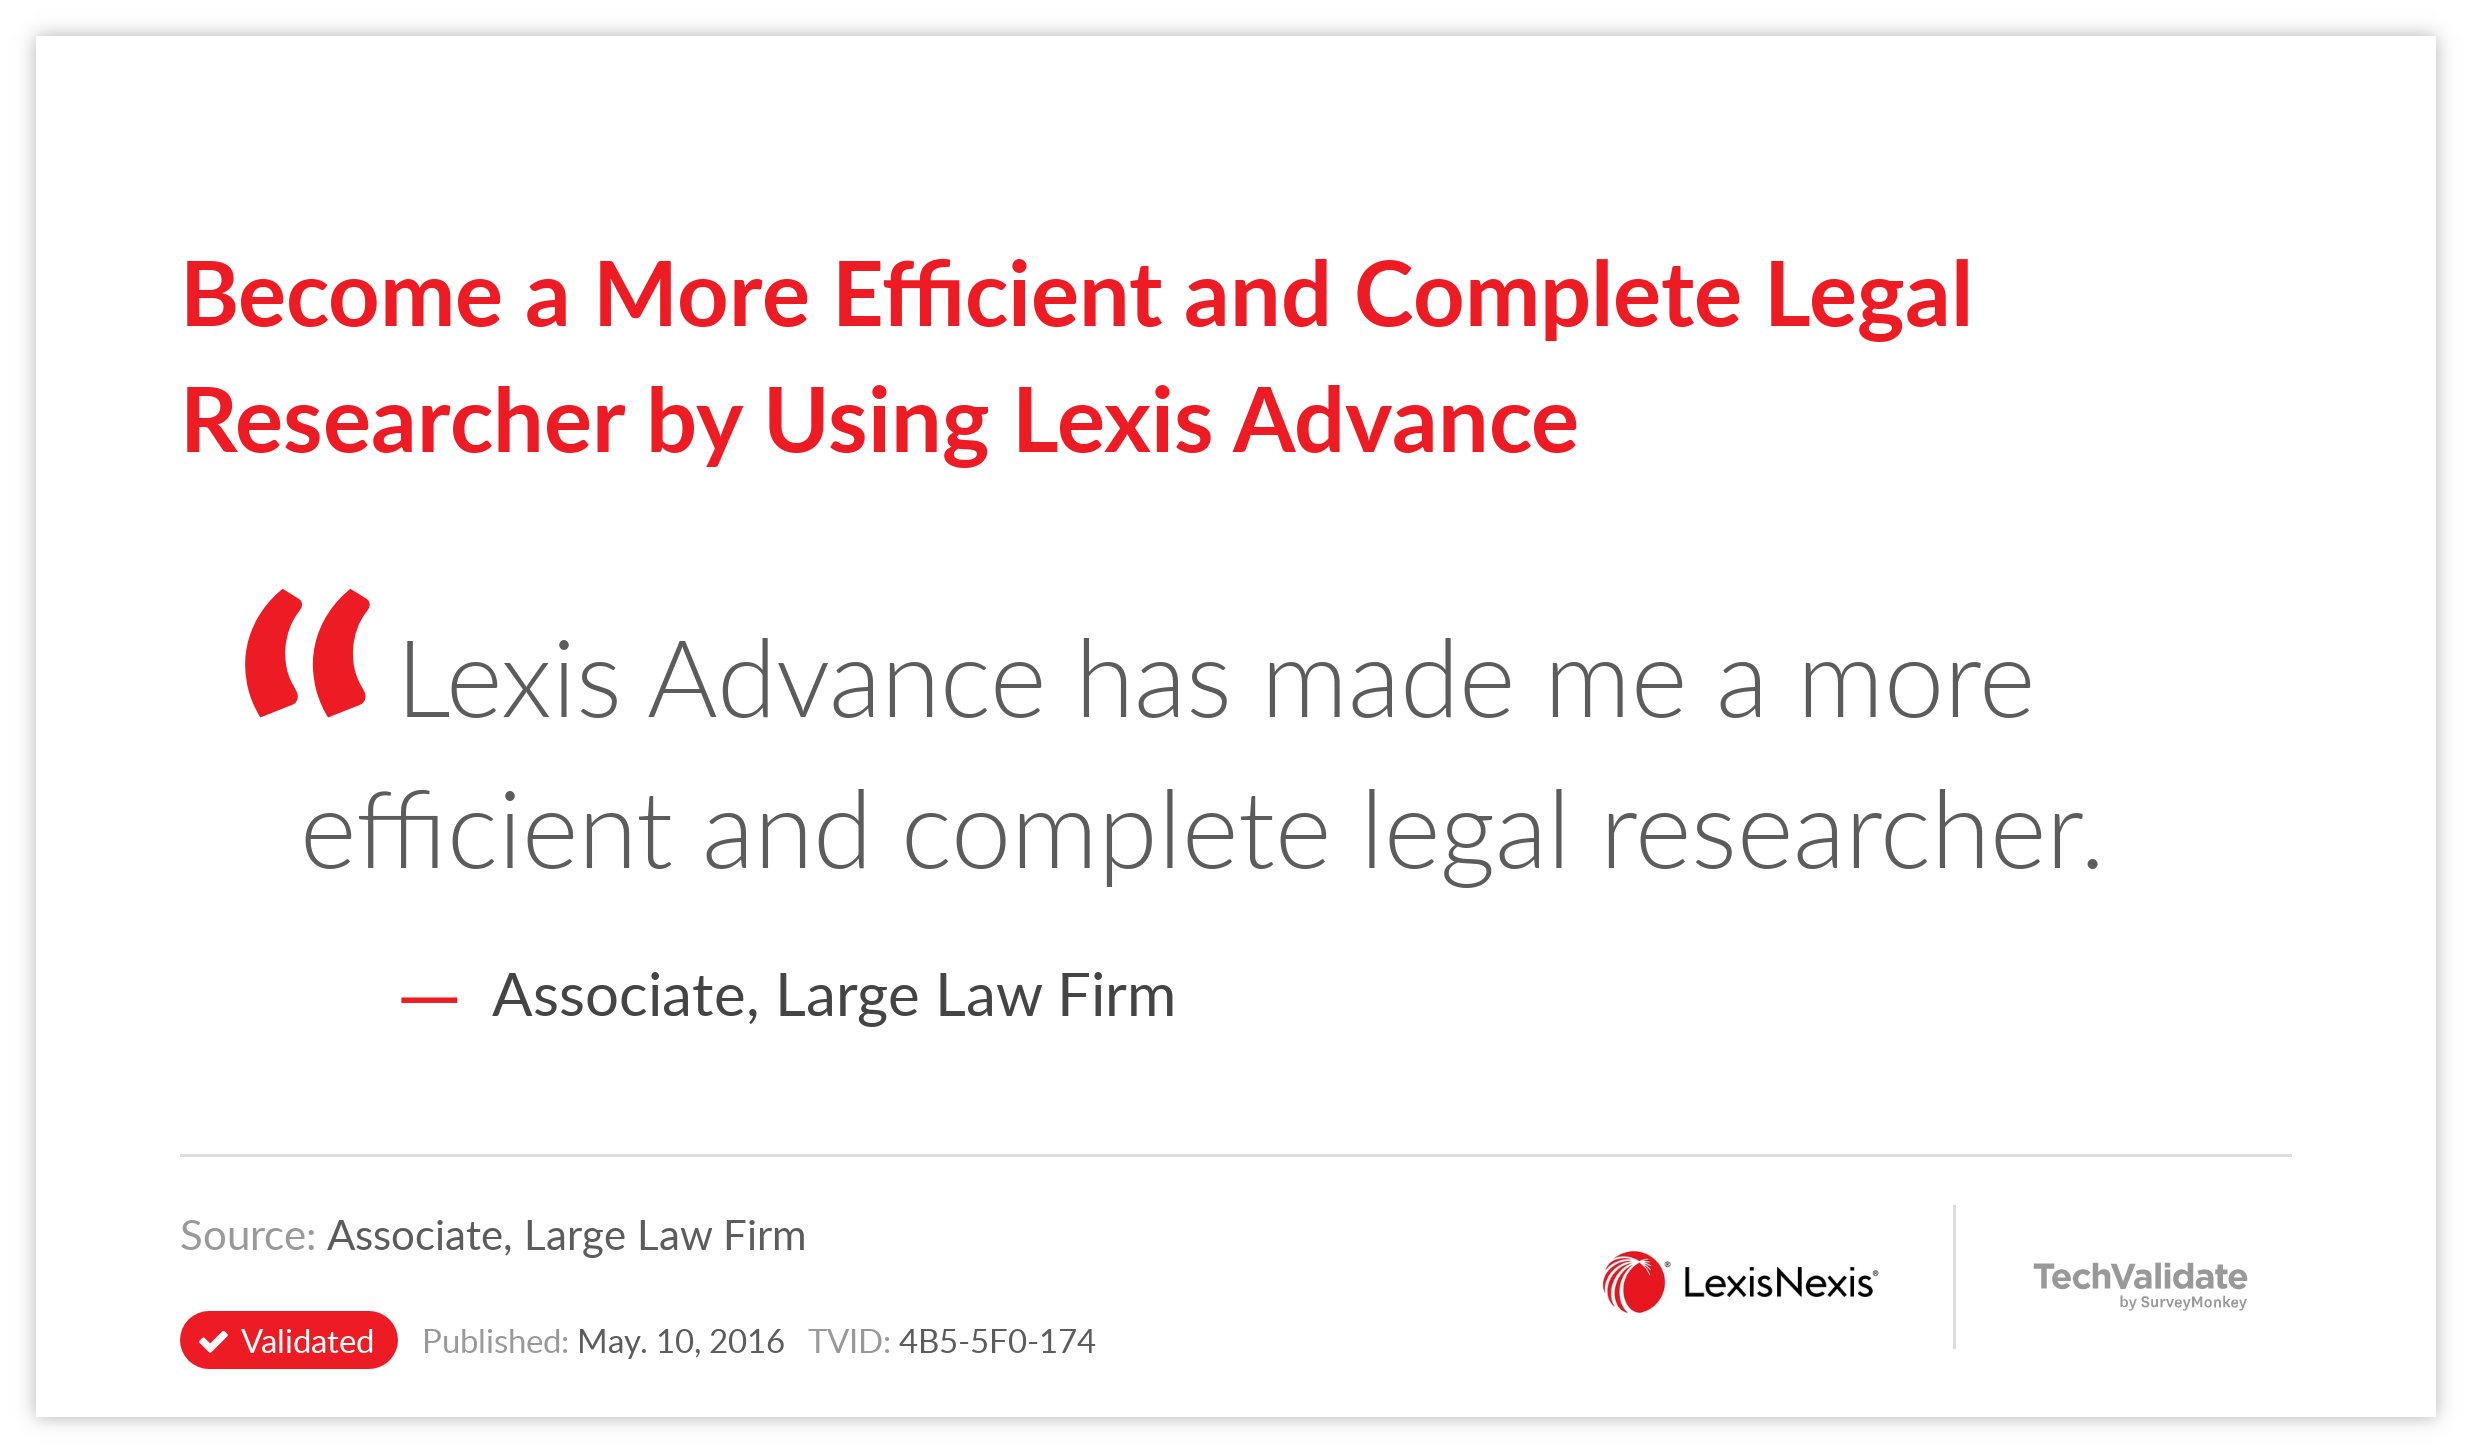 Become a More Efficient and Complete Legal Researcher by Using Lexis Advance